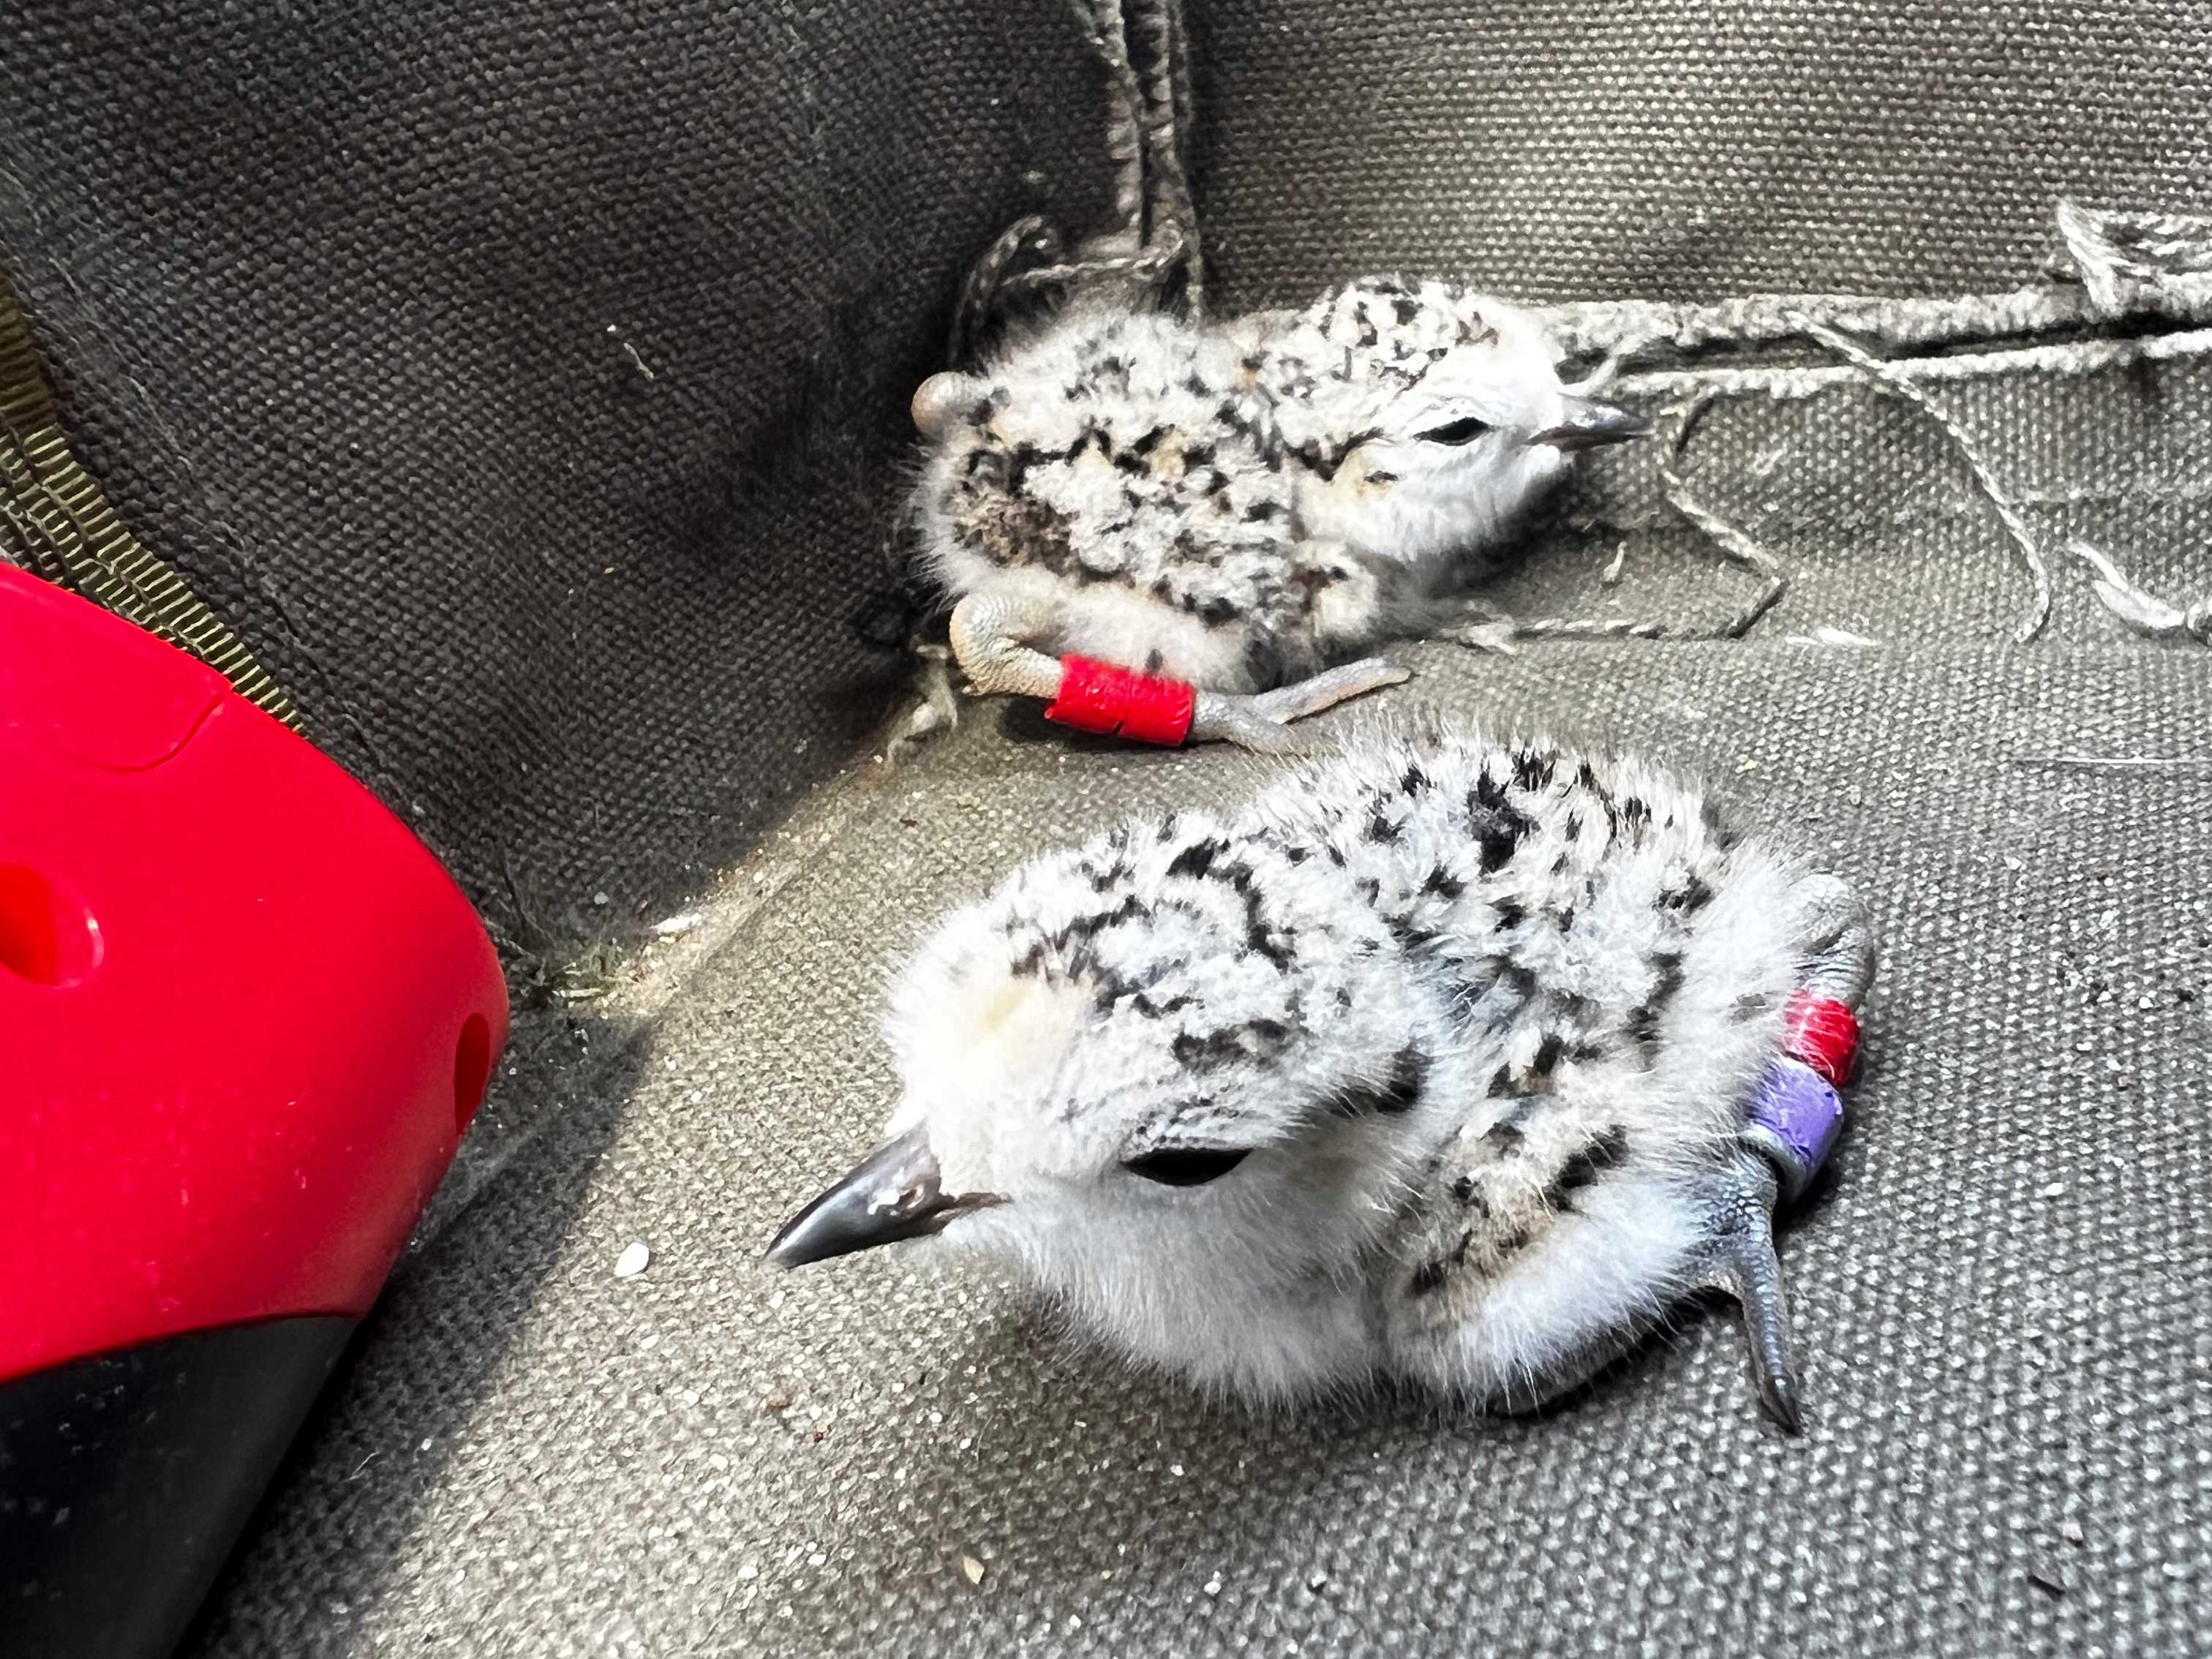 A photo of two small black-speckled, beige-colored shorebird chicks with small bands on their legs sitting on gray canvas.